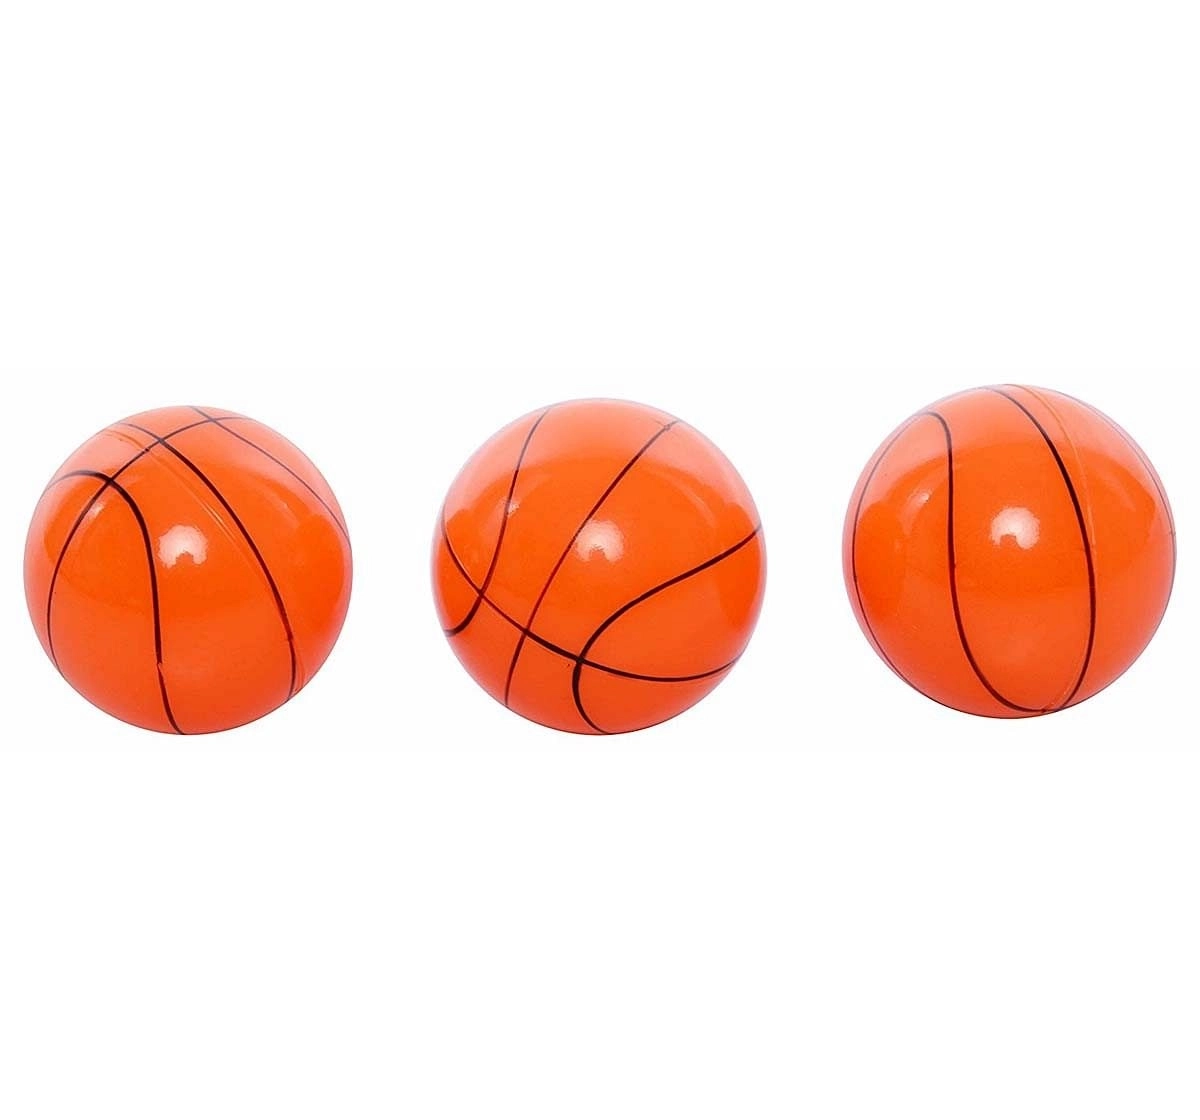 Hostfull Basketball Game with Score 2-Players Indoor Sports for Kids age 5Y+ 